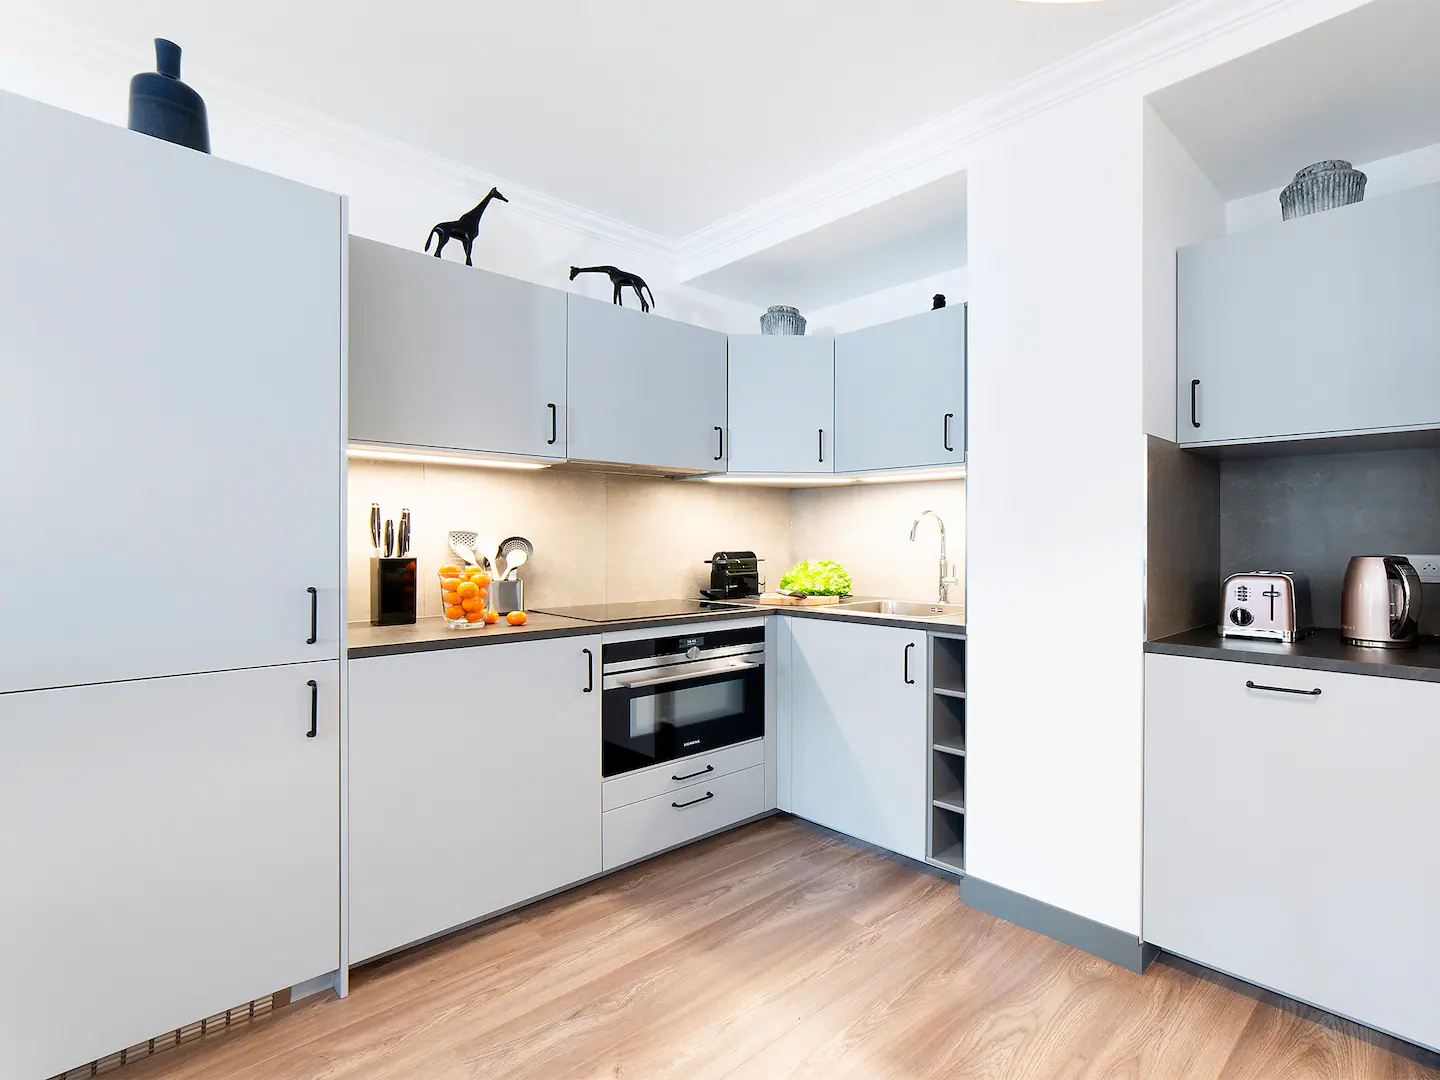 Fully equipped kitchen: oven-microwave, induction hob, Nespresso coffee machine, washer/dryer and dishwasher